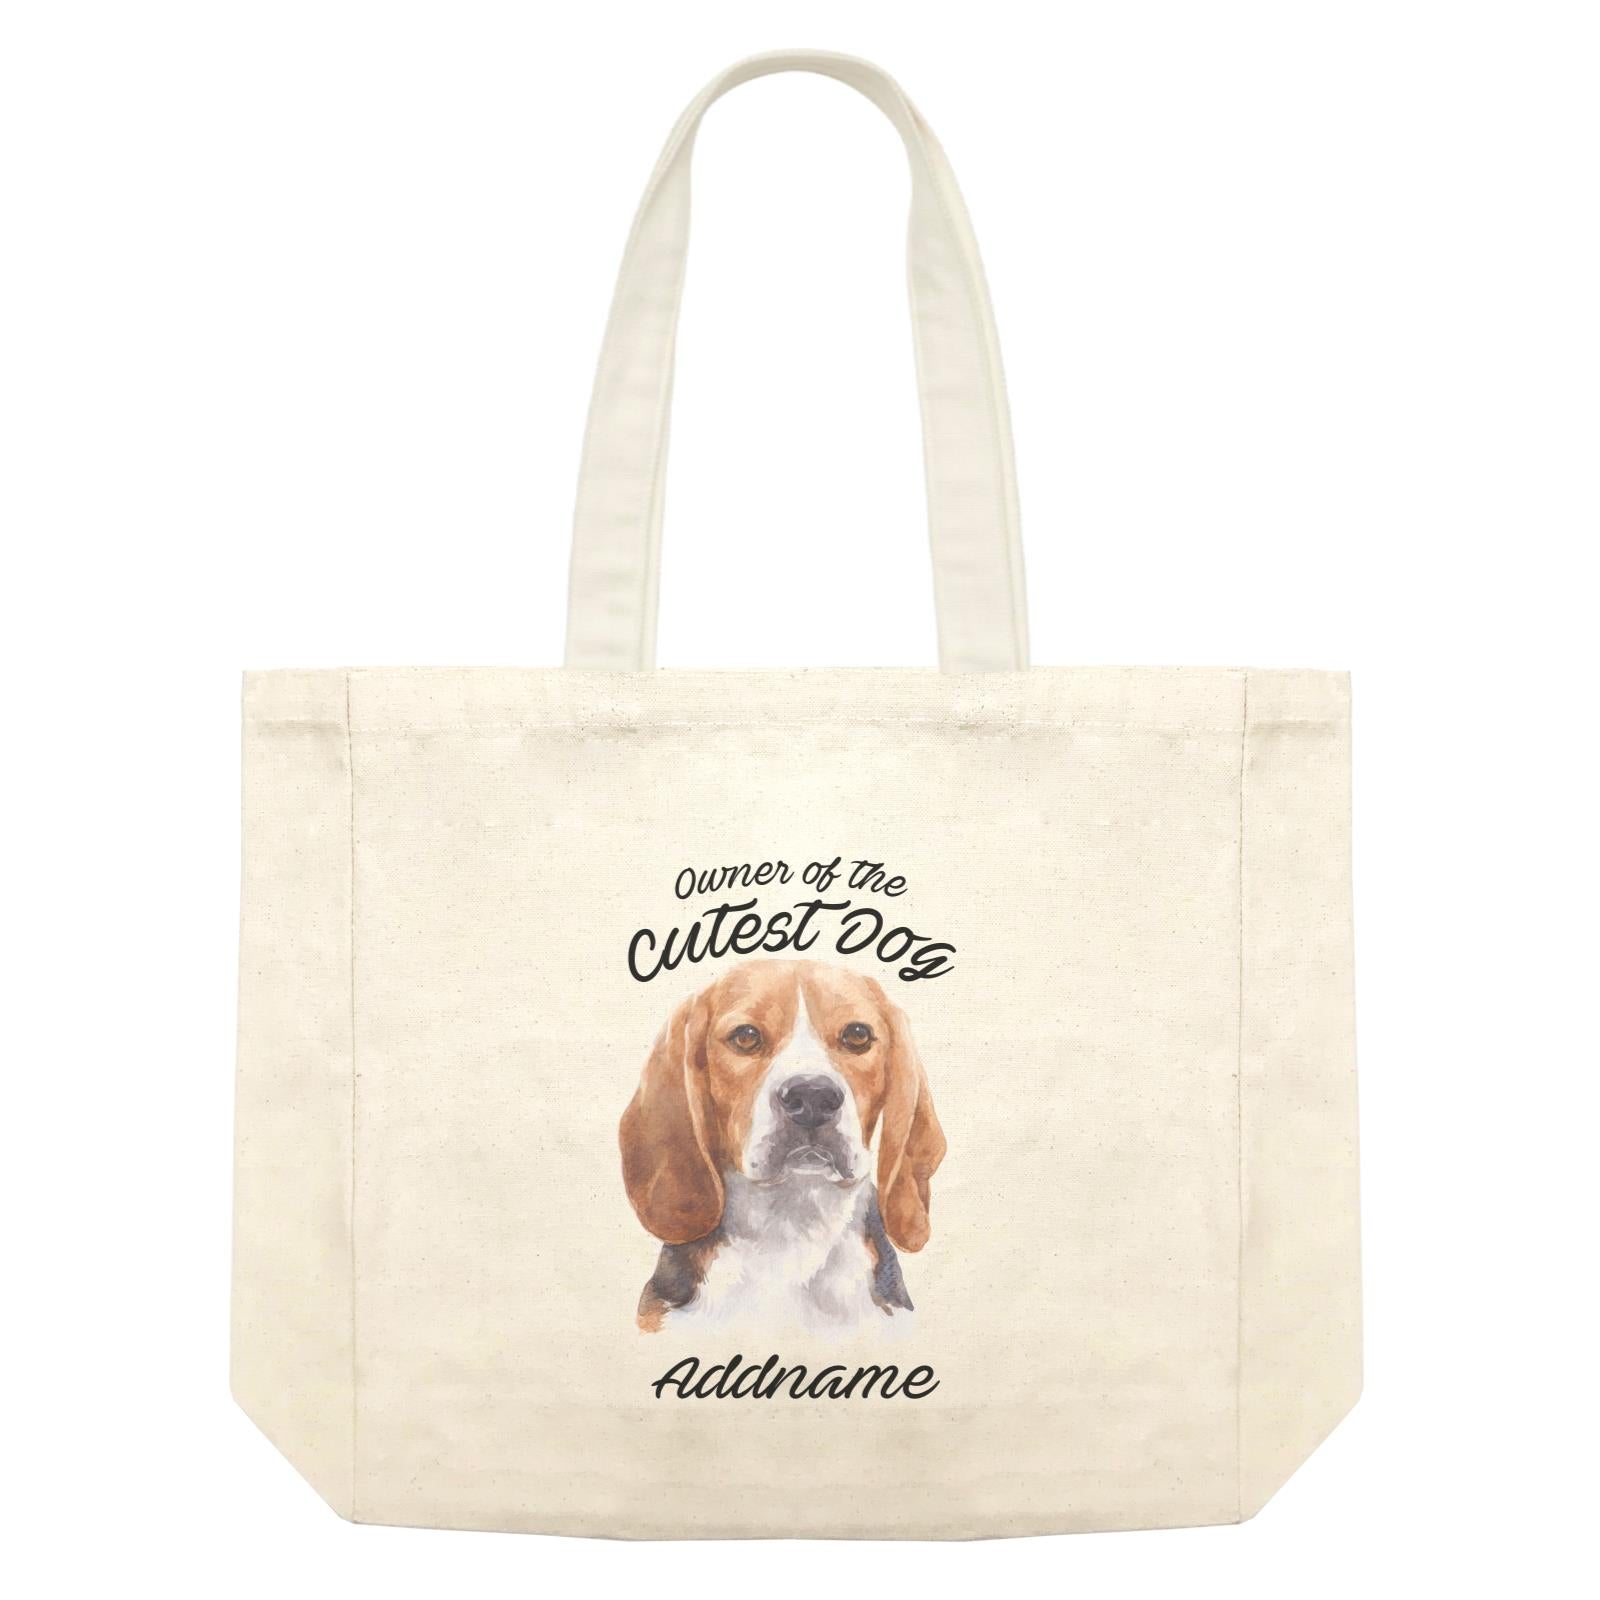 Watercolor Dog Owner Of The Dog Beagle Frown Addname Shopping Bag